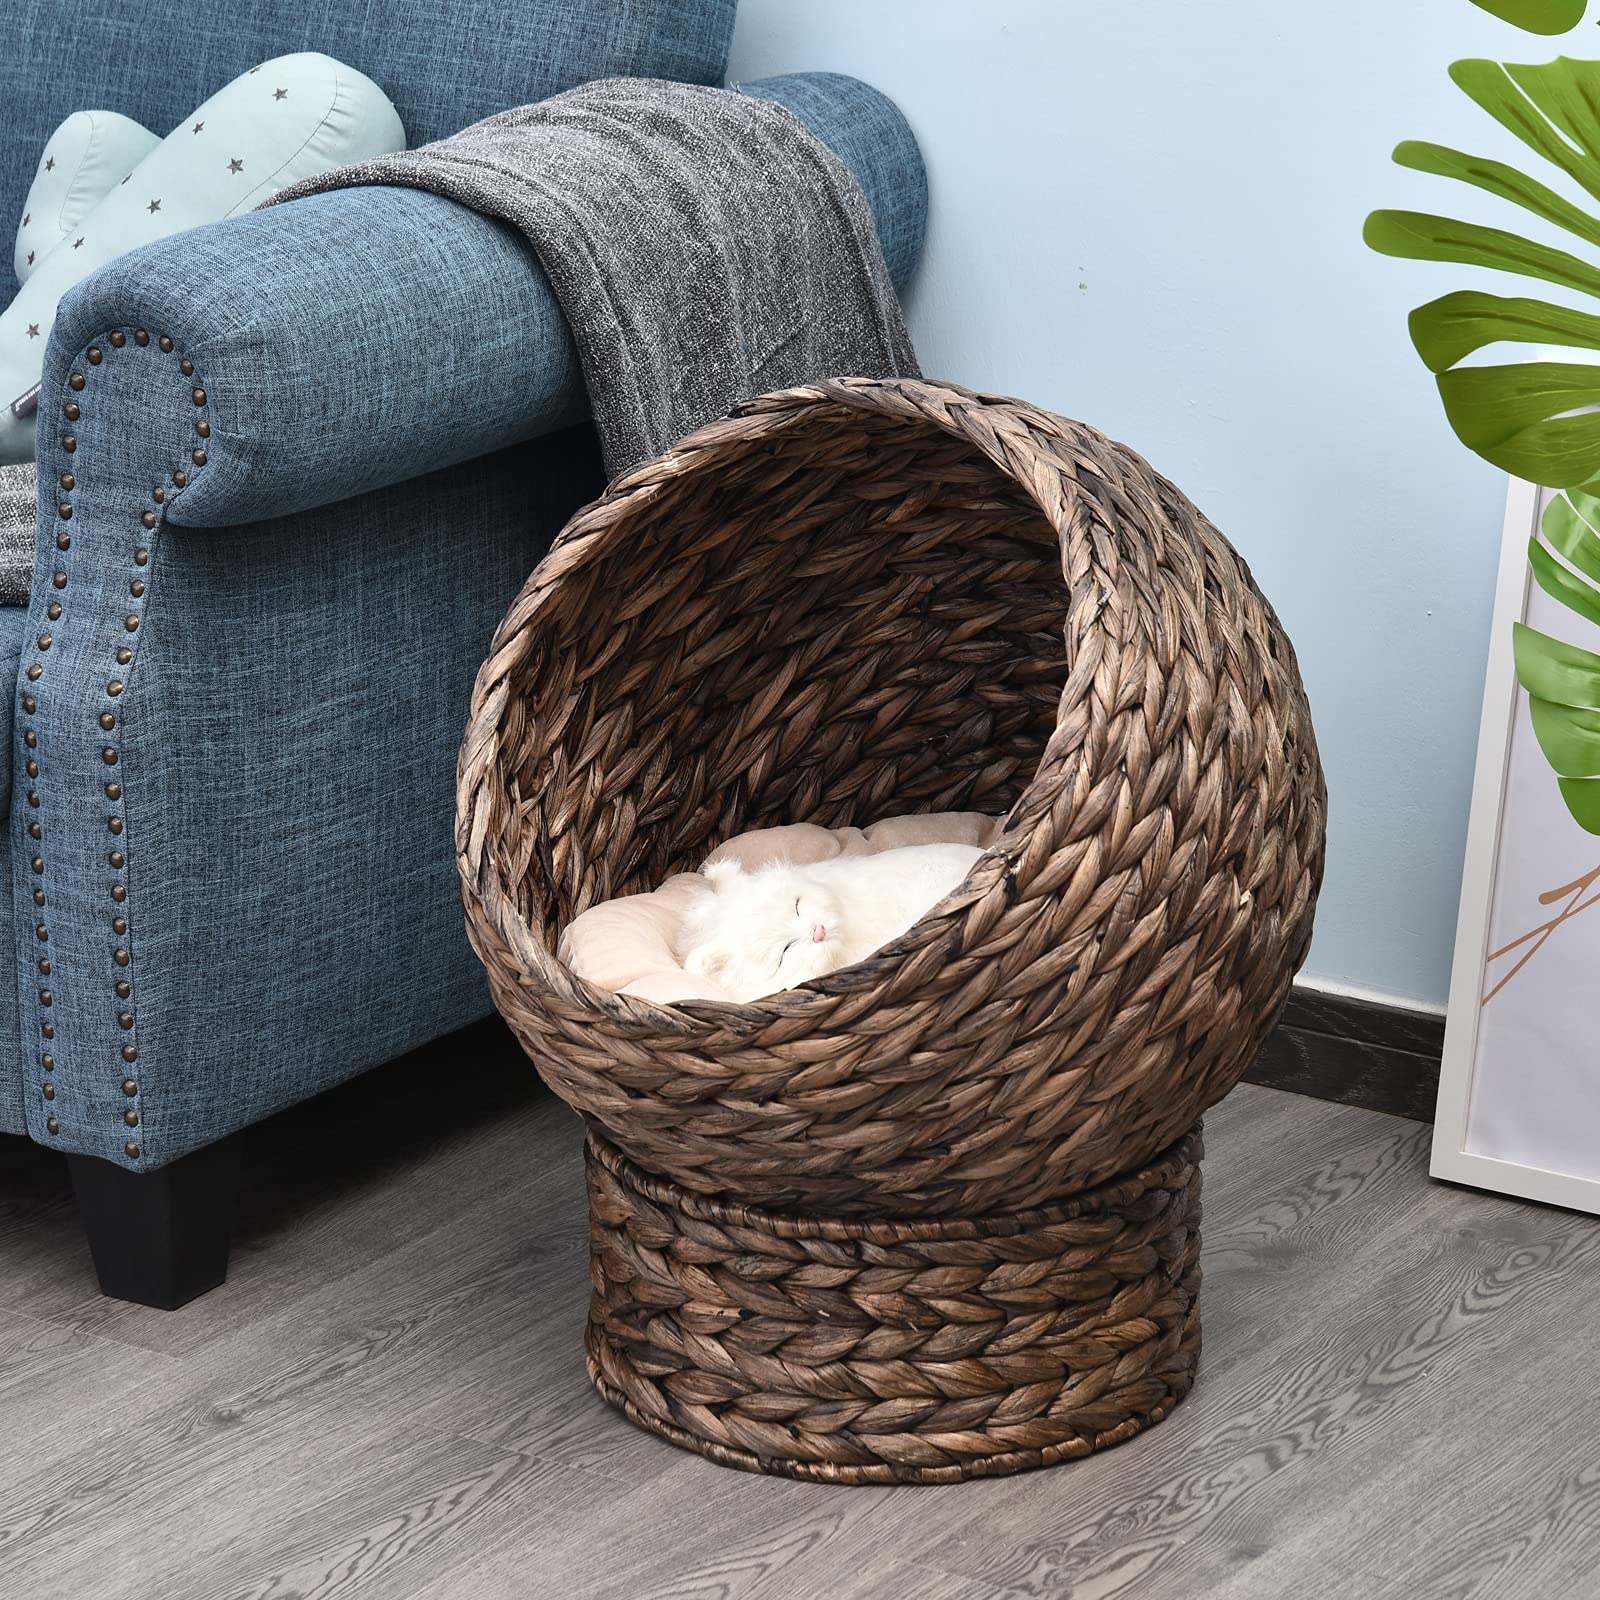 PawHut Handwoven Elevated Cat Bed with Soft Cushion & Cat Egg Chair Shape, Cat Basket Bed Kitty House with Stand, Raised Wicker Cat Bed for Indoor Cats, 23.5" H, Grey